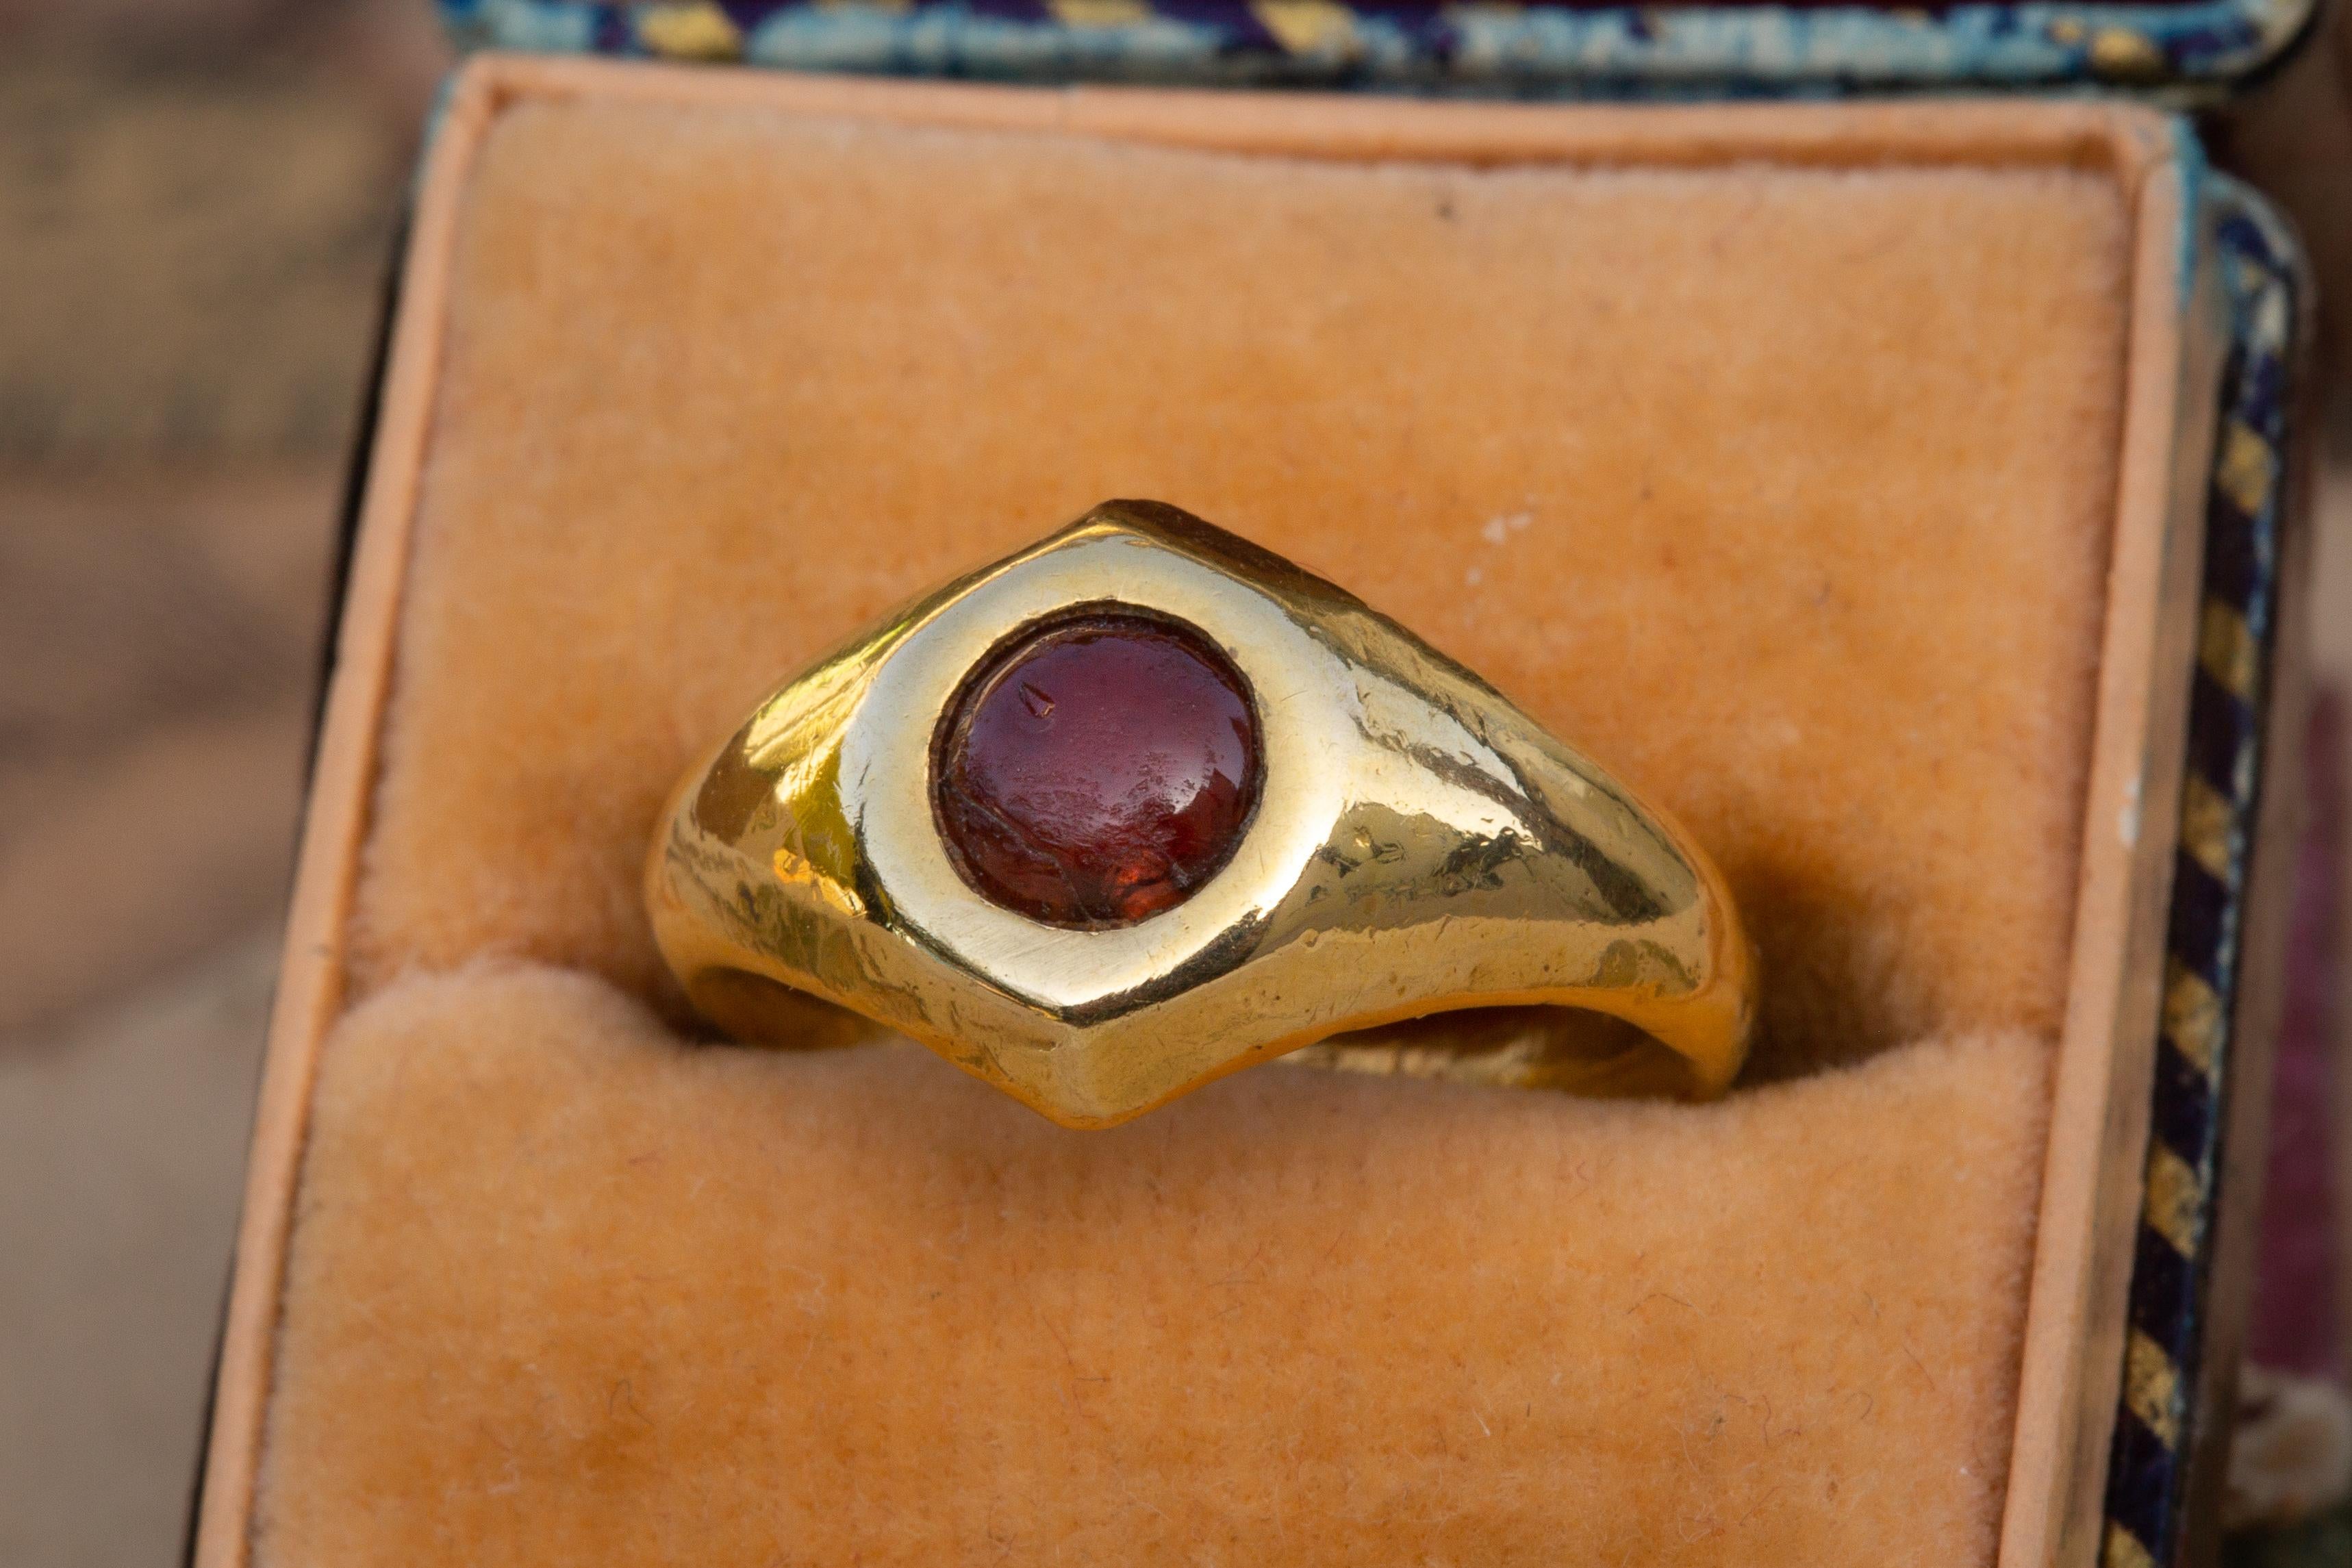 Small Ancient Roman Period Gold Garnet Cabochon Ring

A beautiful example of a Roman garnet cabochon-set gold ring! It displays a Type 2b Roman Gaul finger-ring shape (Guiraud classification) which dates the ring to between the 1st century BCE and